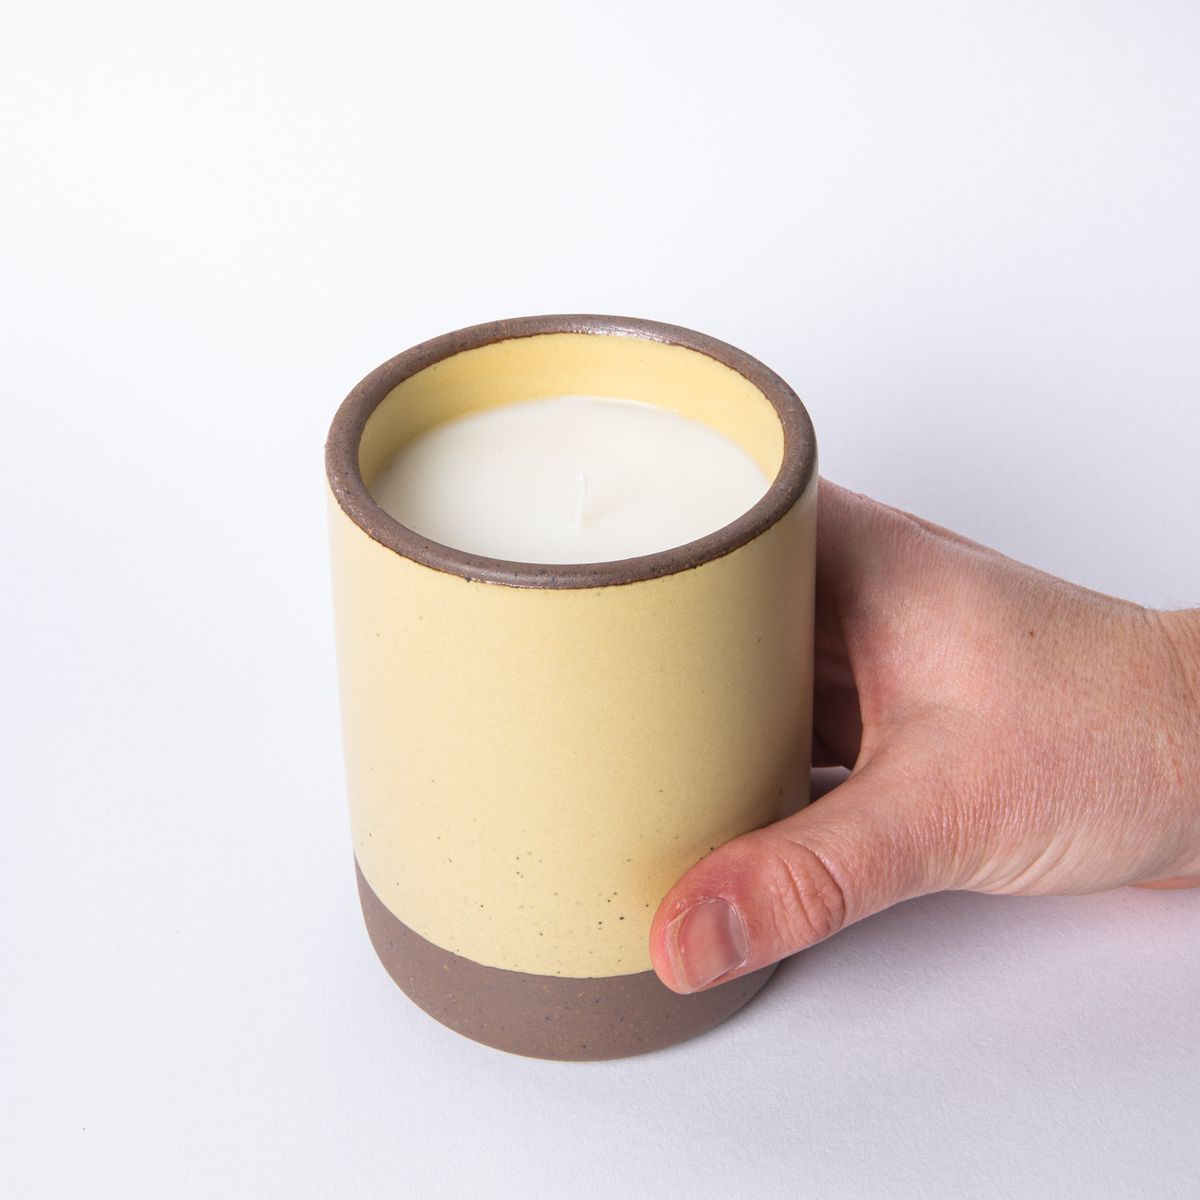 Hand holding a large ceramic vessel in soft butter yellow color with candle inside